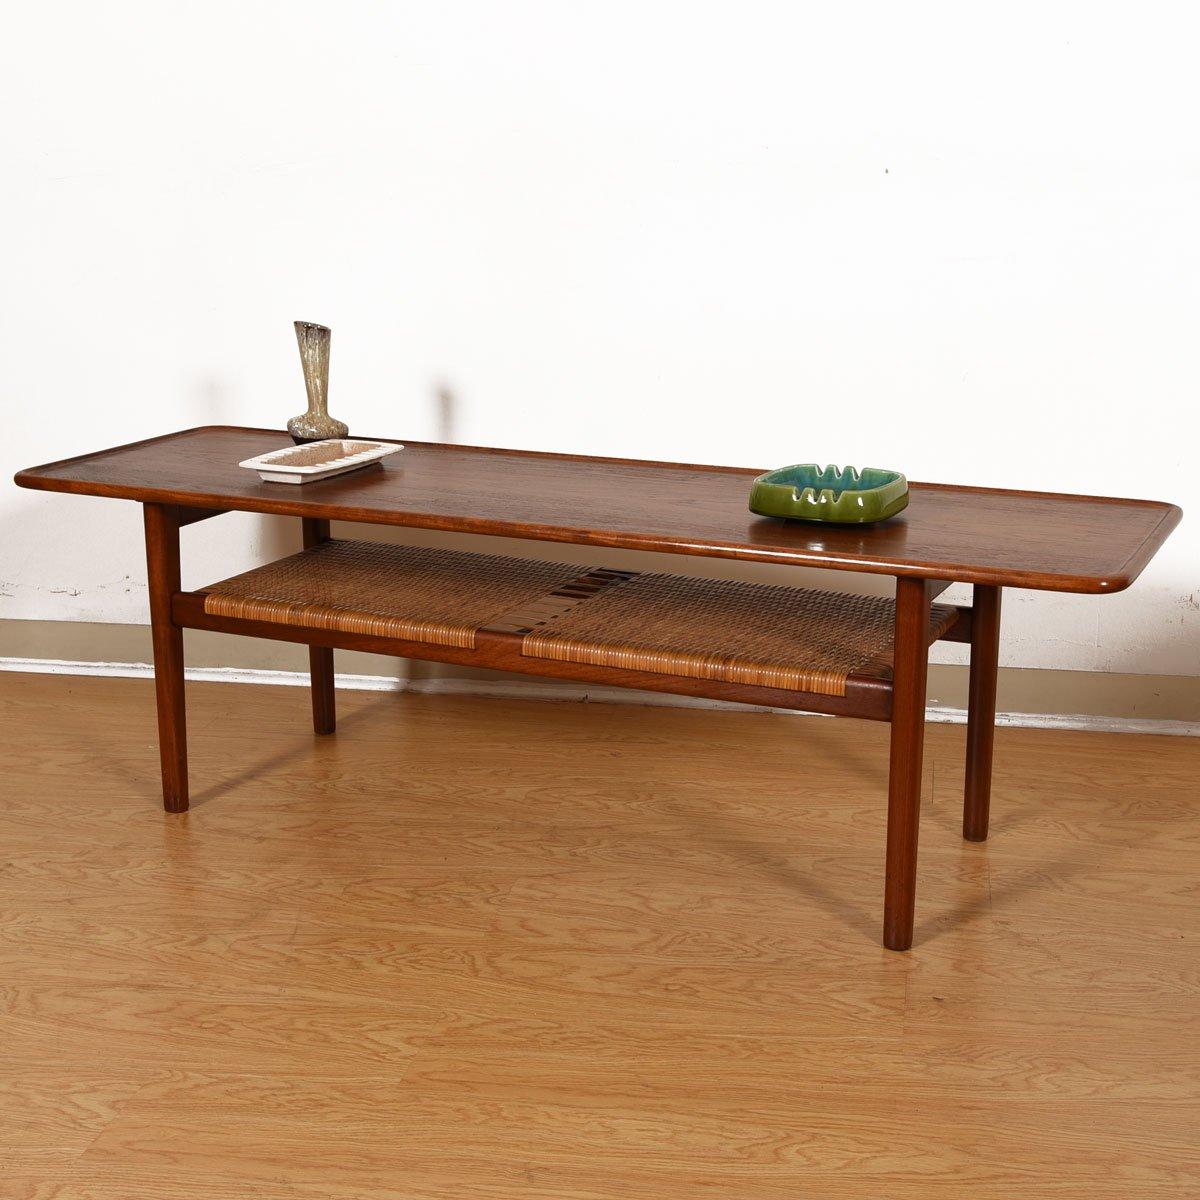 20th Century Danish Teak Coffee Table by Hans Wegner for Andreas Tuck For Sale